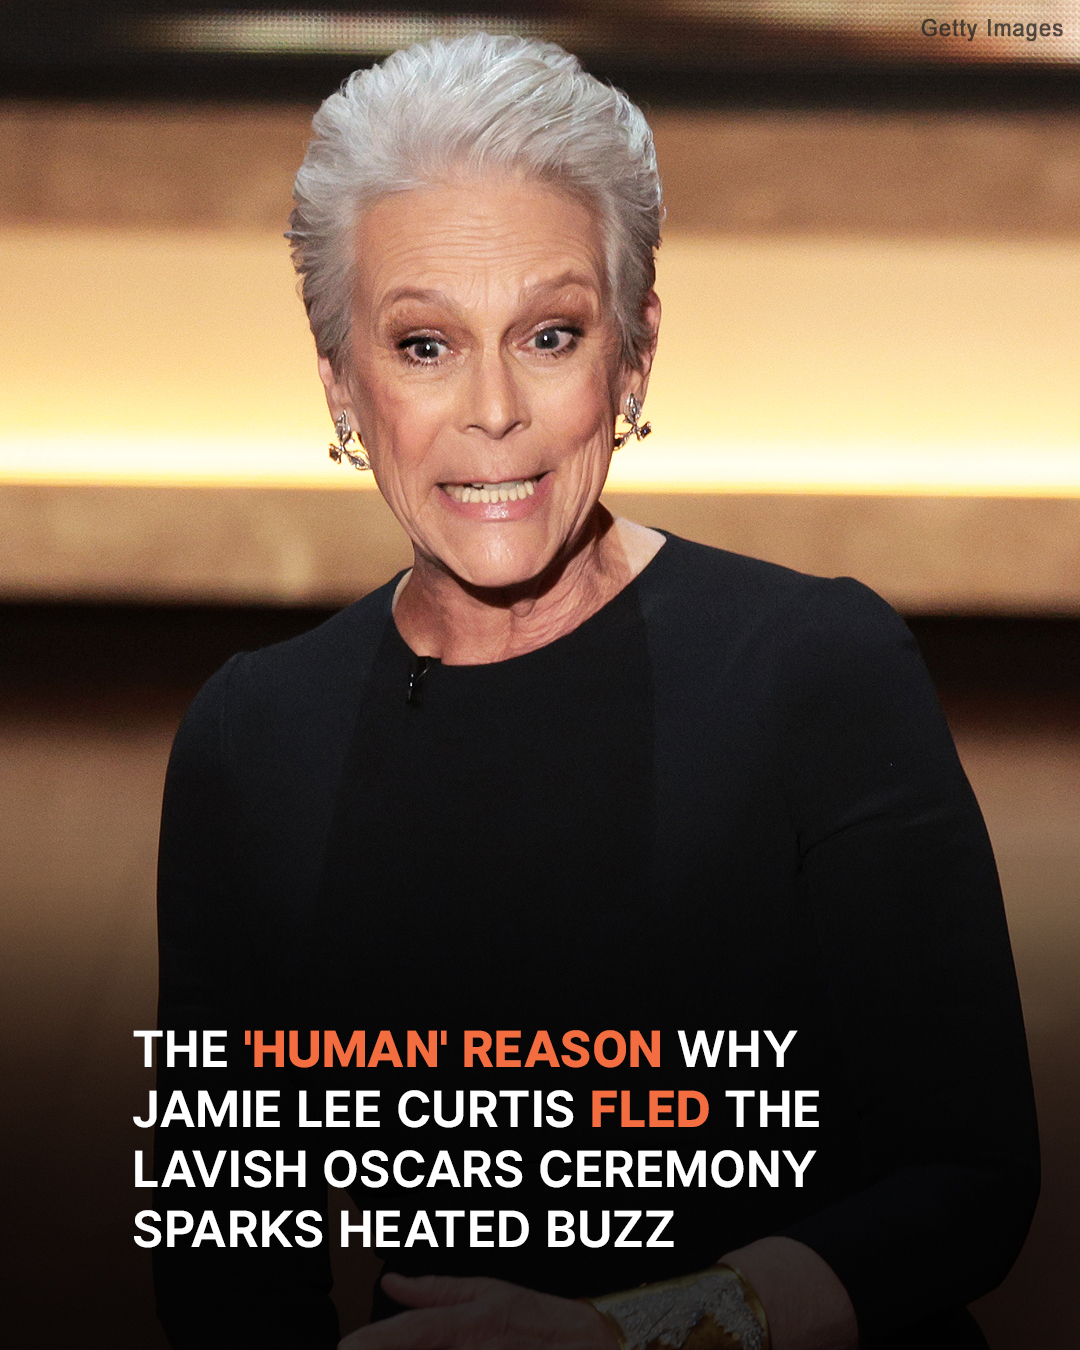 Why Does The Real Reason For Jamie Lee Curtis Leaving The Oscars Early Spark A Stir Science